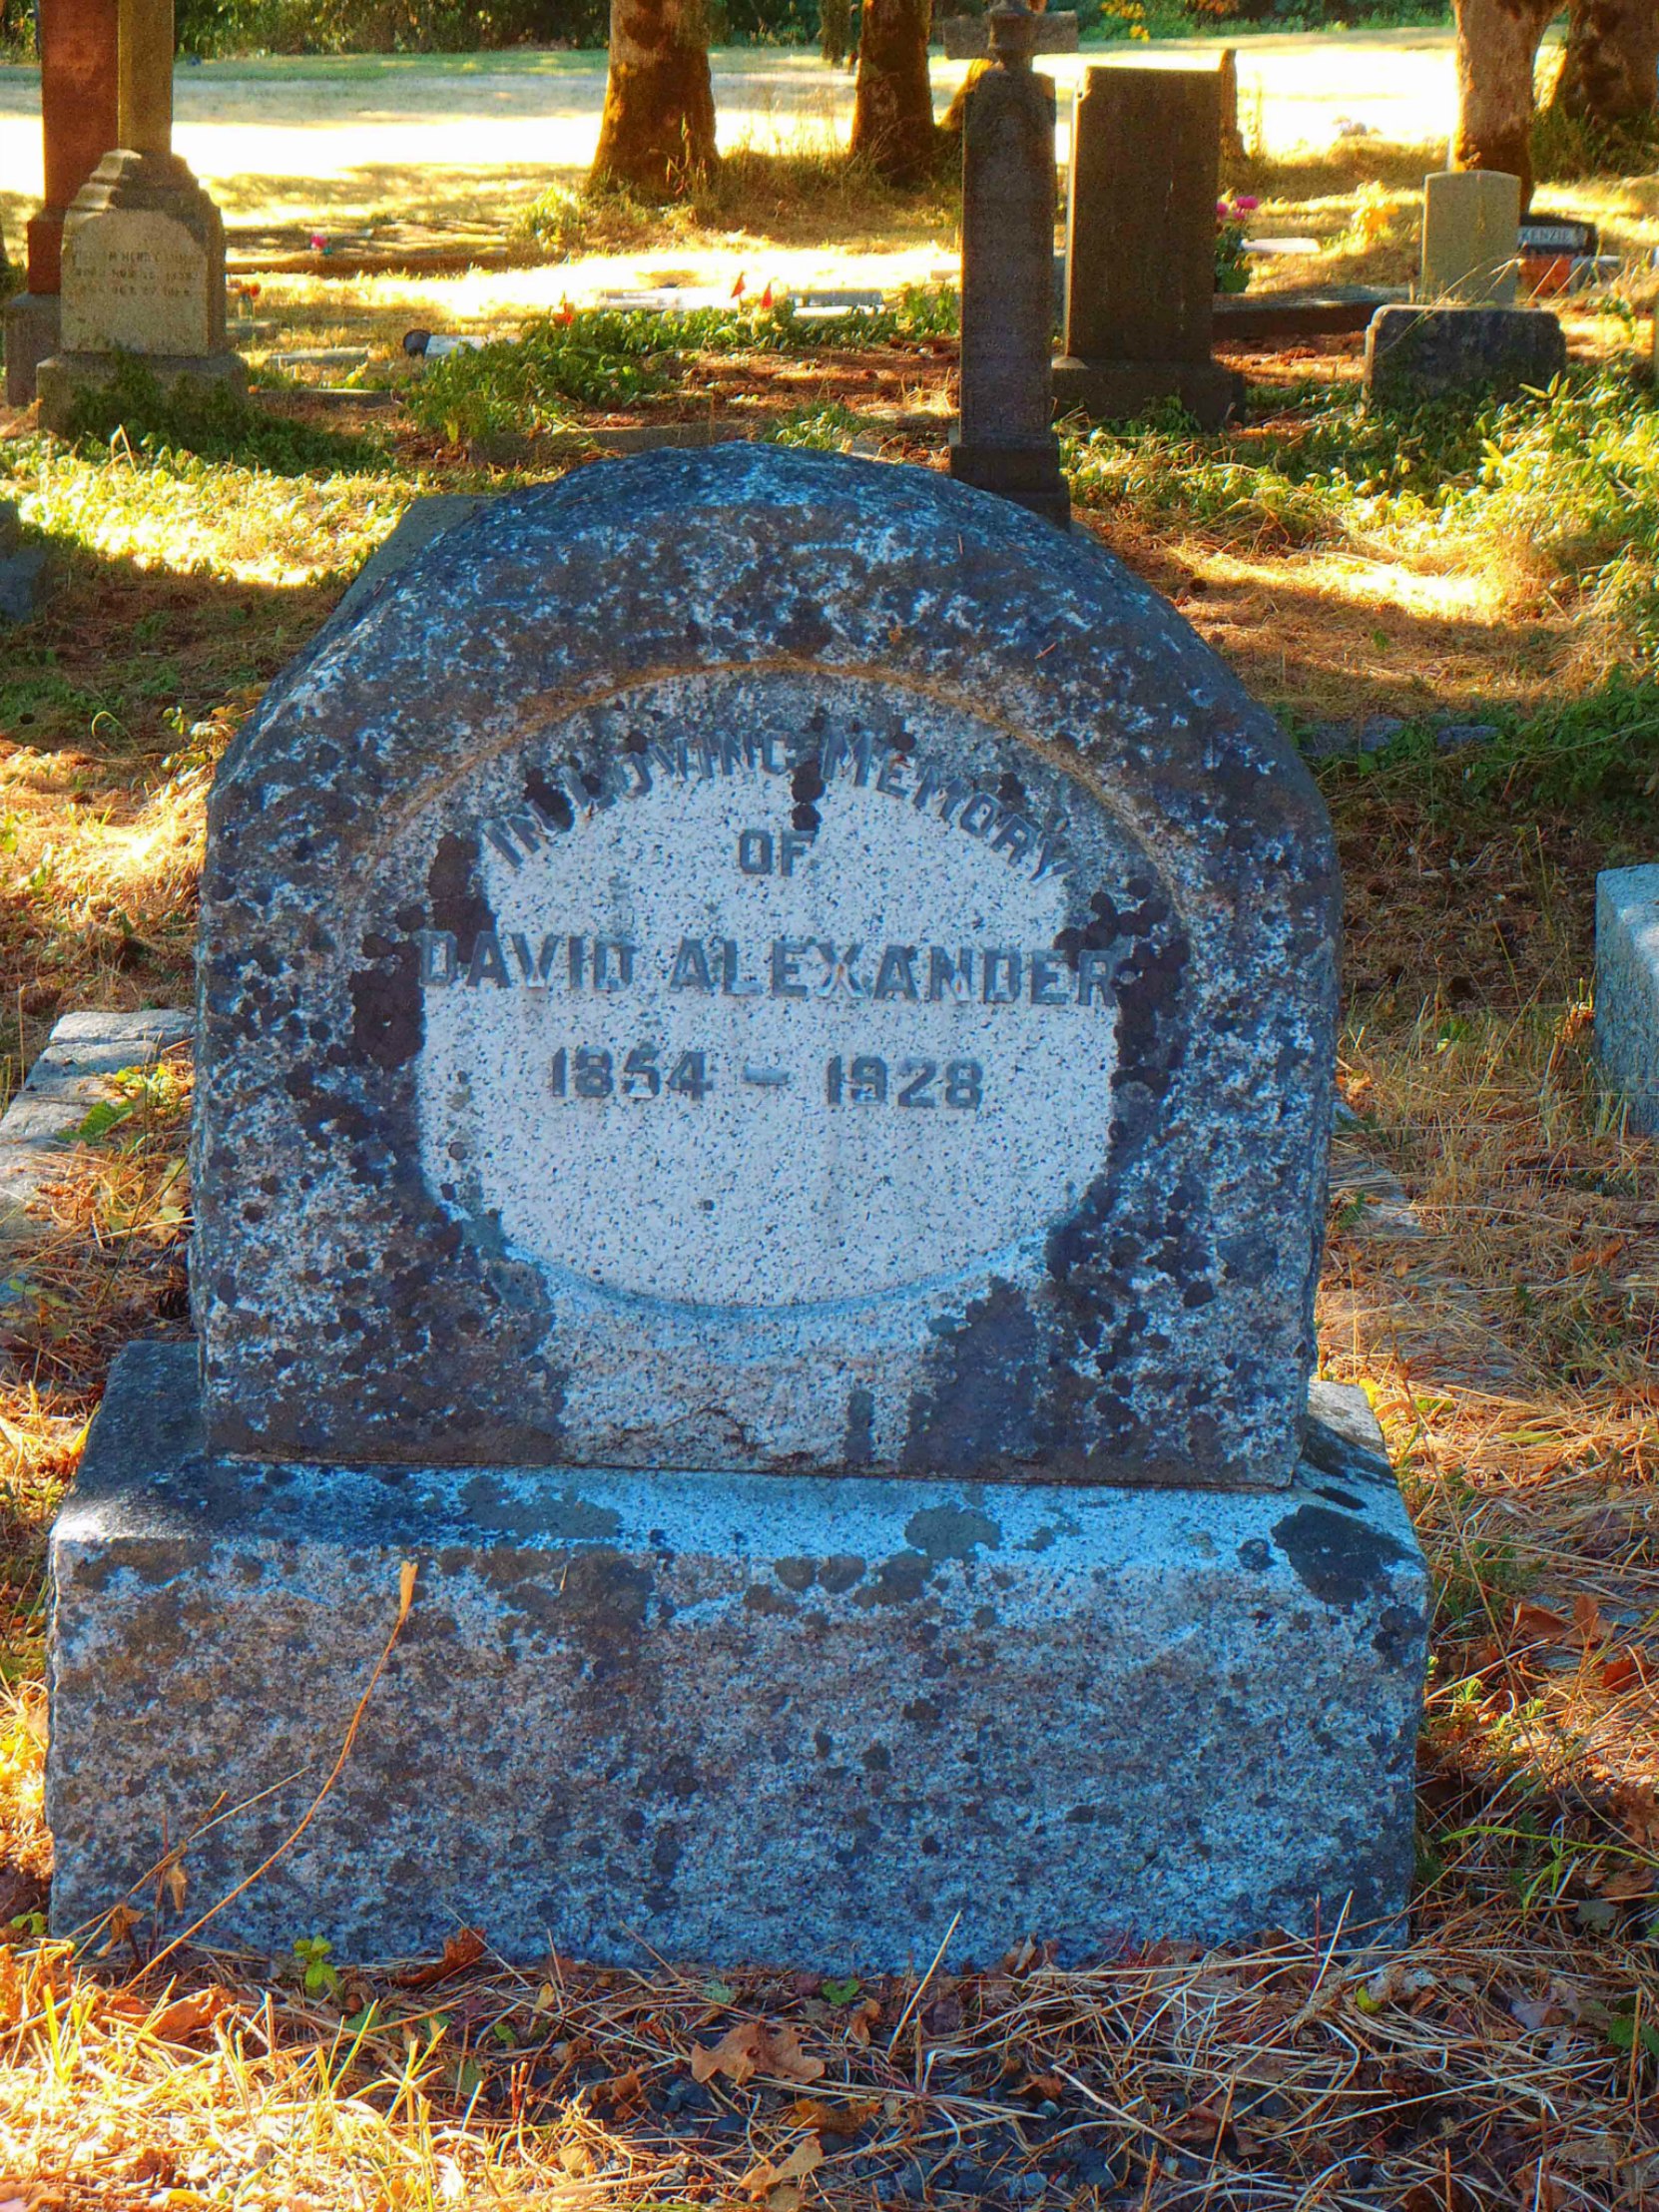 David Alexander grave stone, St. Peter's Quamichan Anglican cemetery